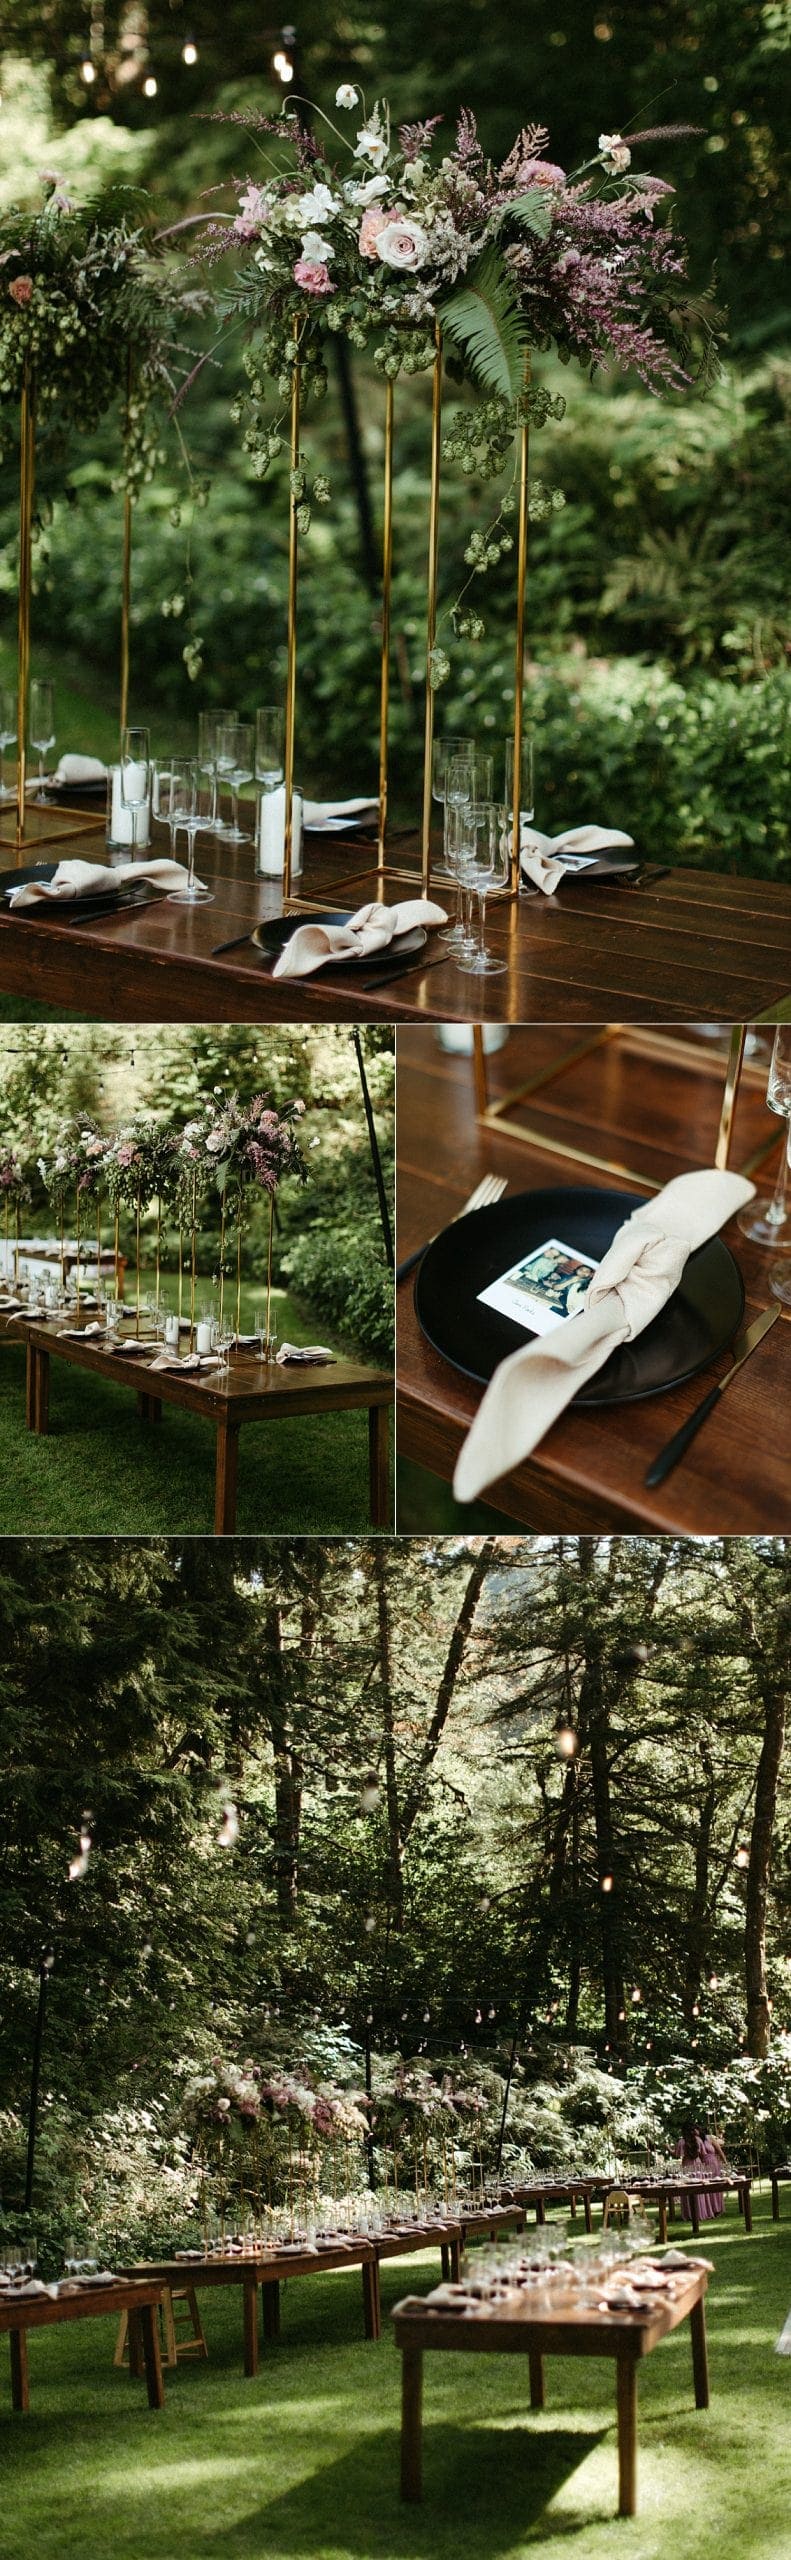 elegant and rustic dinner table set up at bridal veil lakes by marcela pulido photography portland wedding photographer